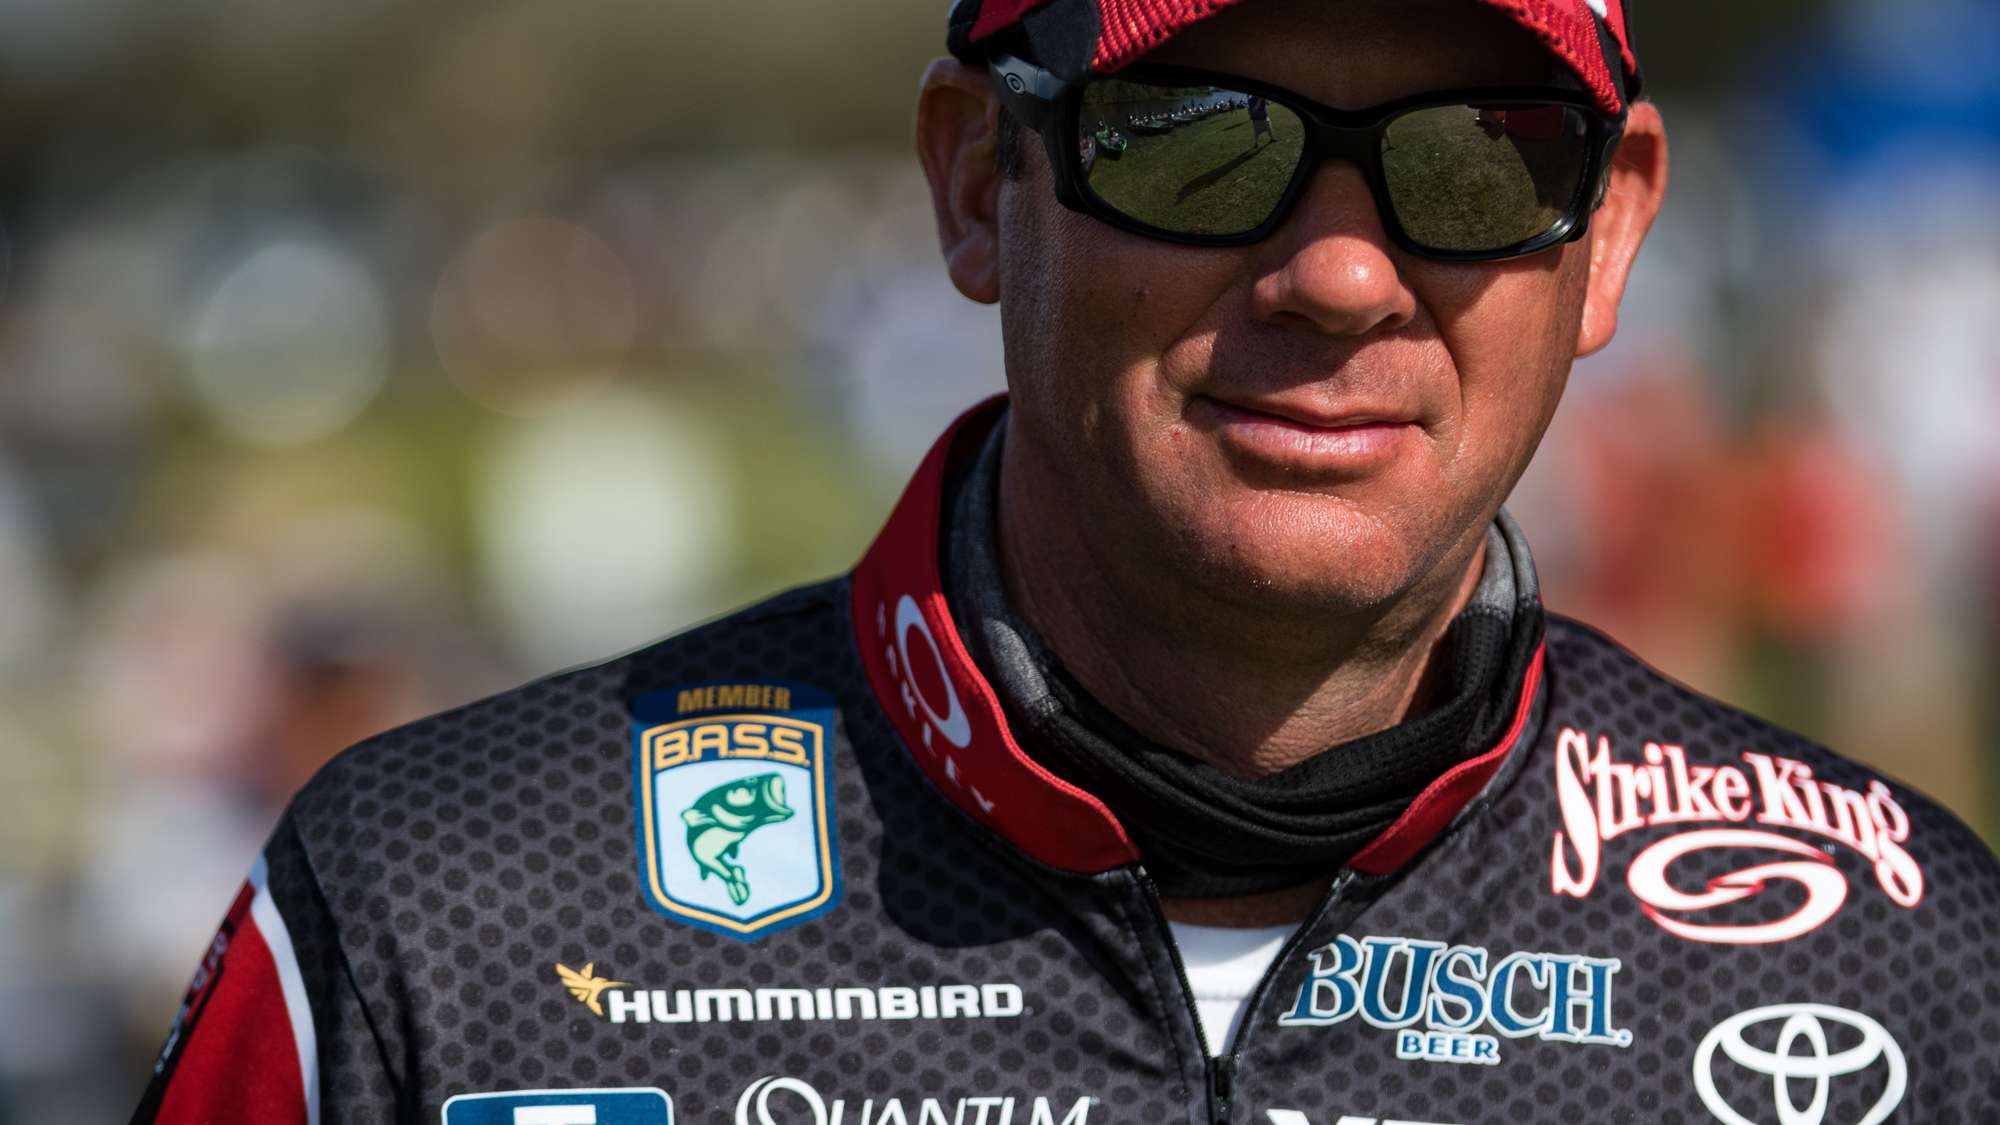 I just noticed that Kevin VanDam doesn't have his name on his jersey. That's OK, KVD. We know who you are.
